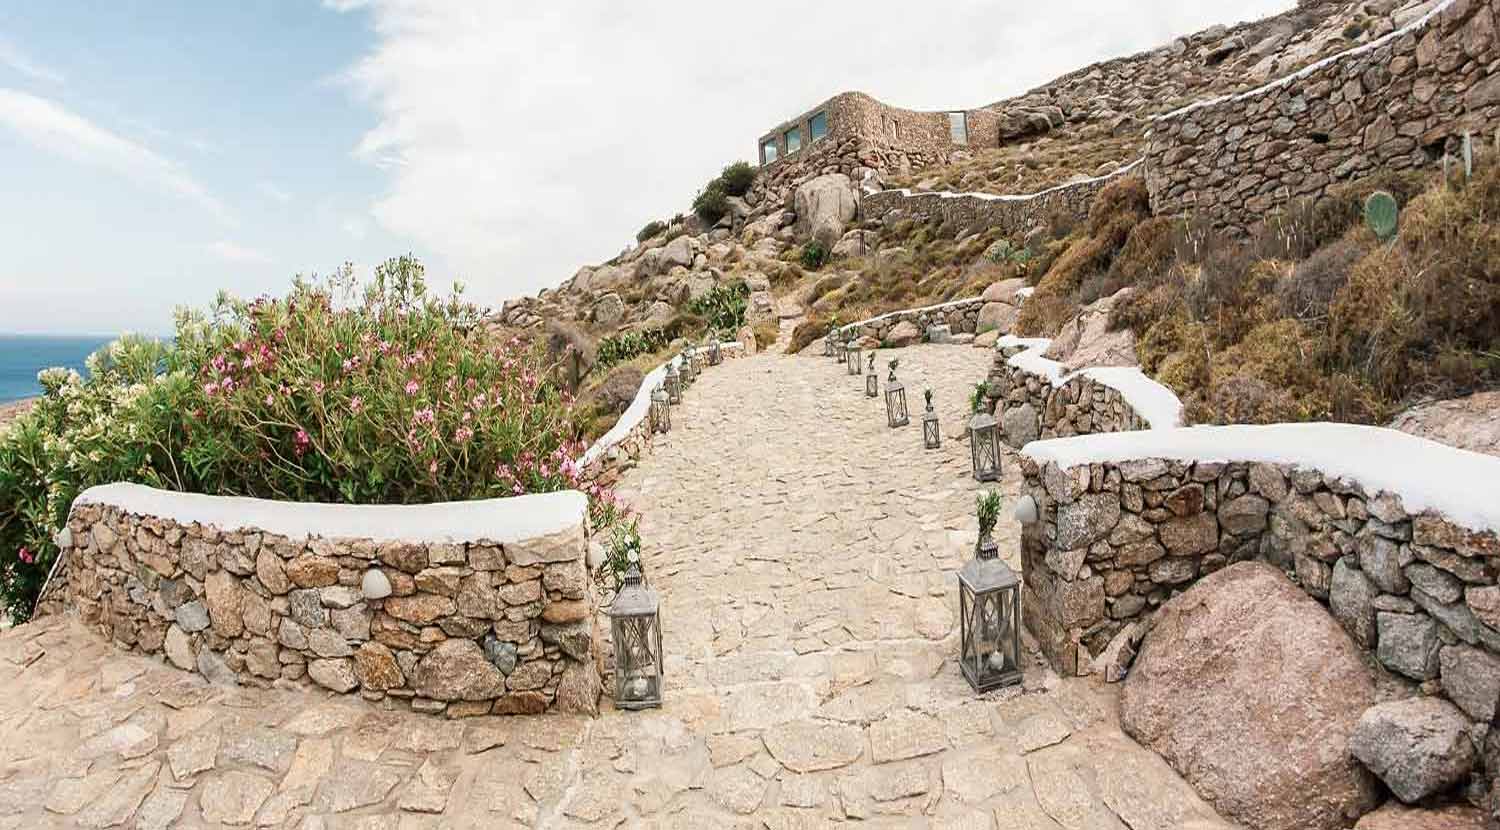 the path to the church from a group of private villas